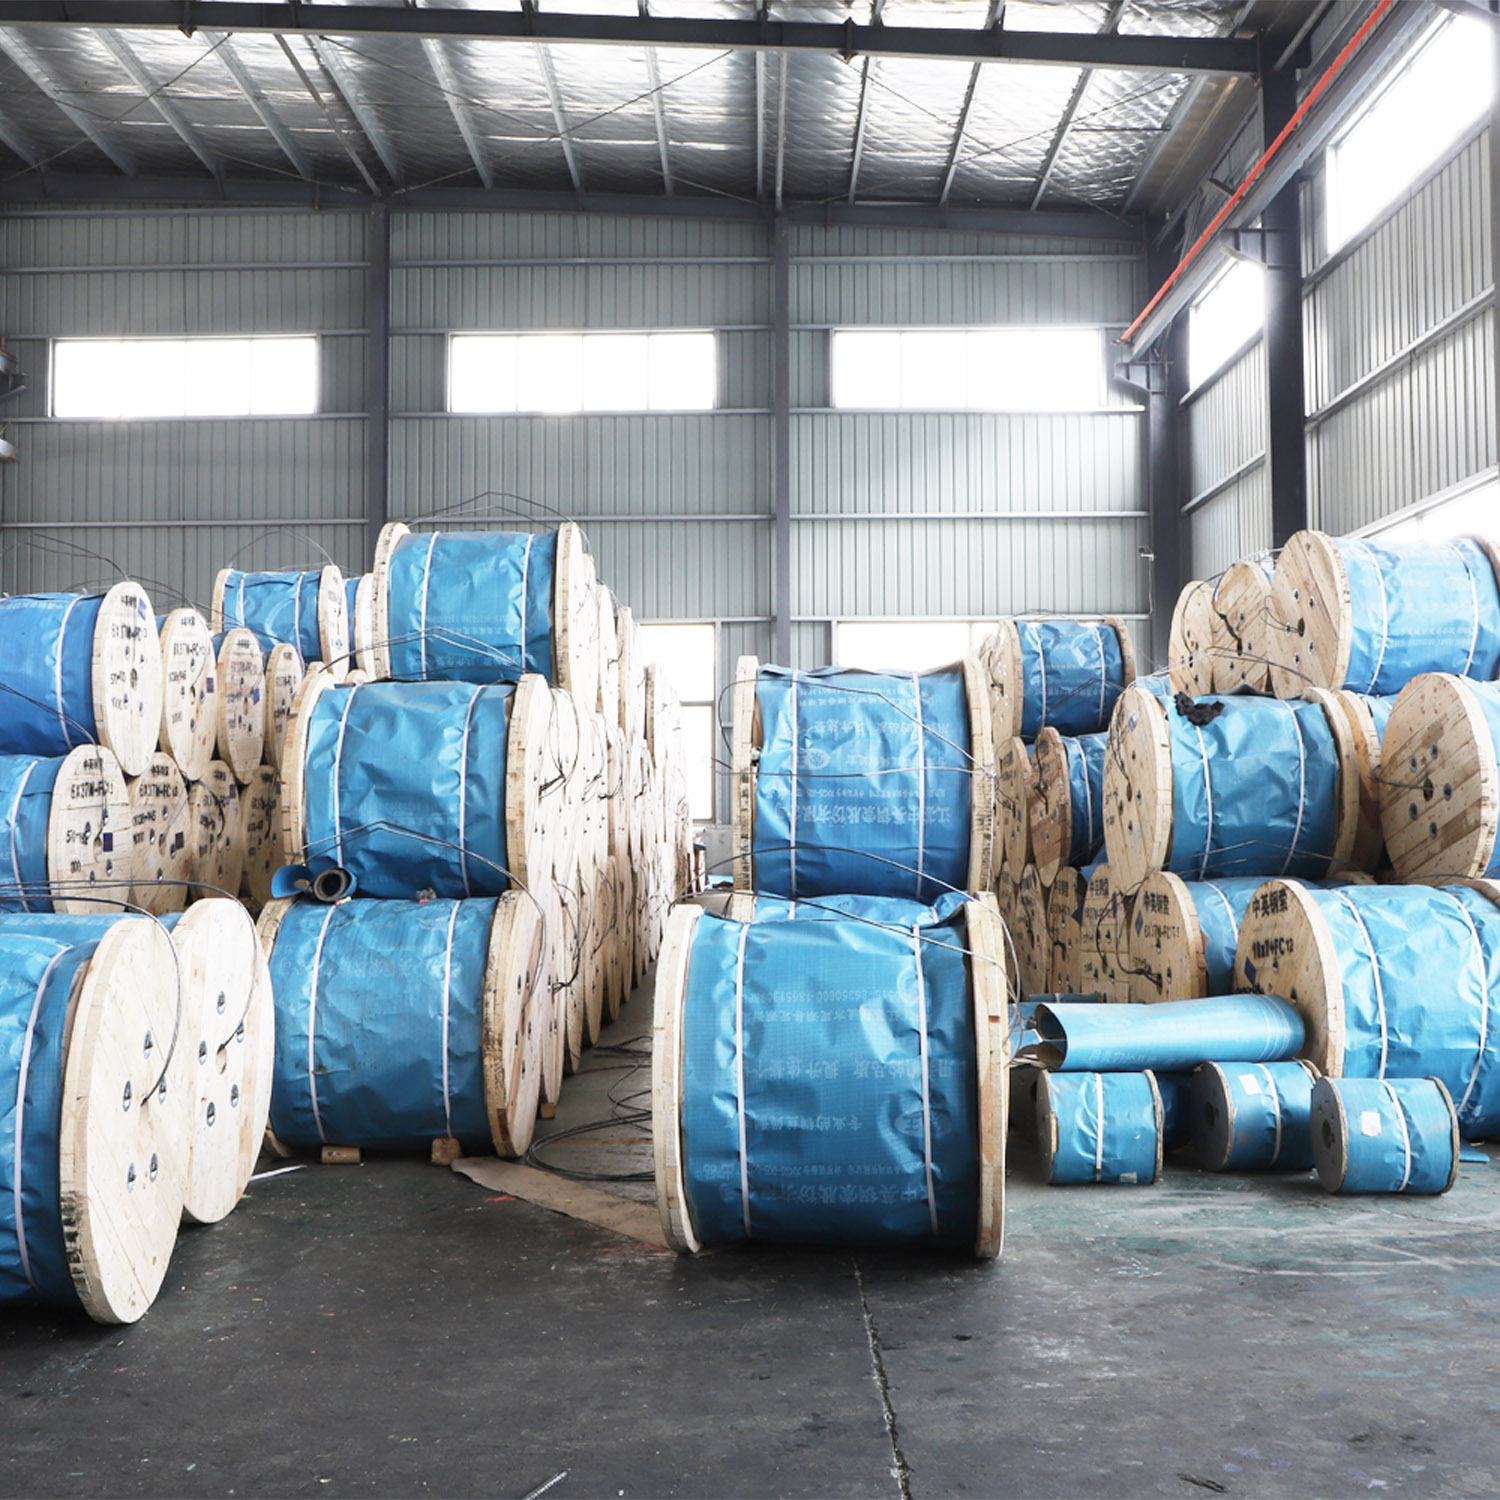 6x19+FC Ungalvanized Steel Wire Rope Drilling Rope